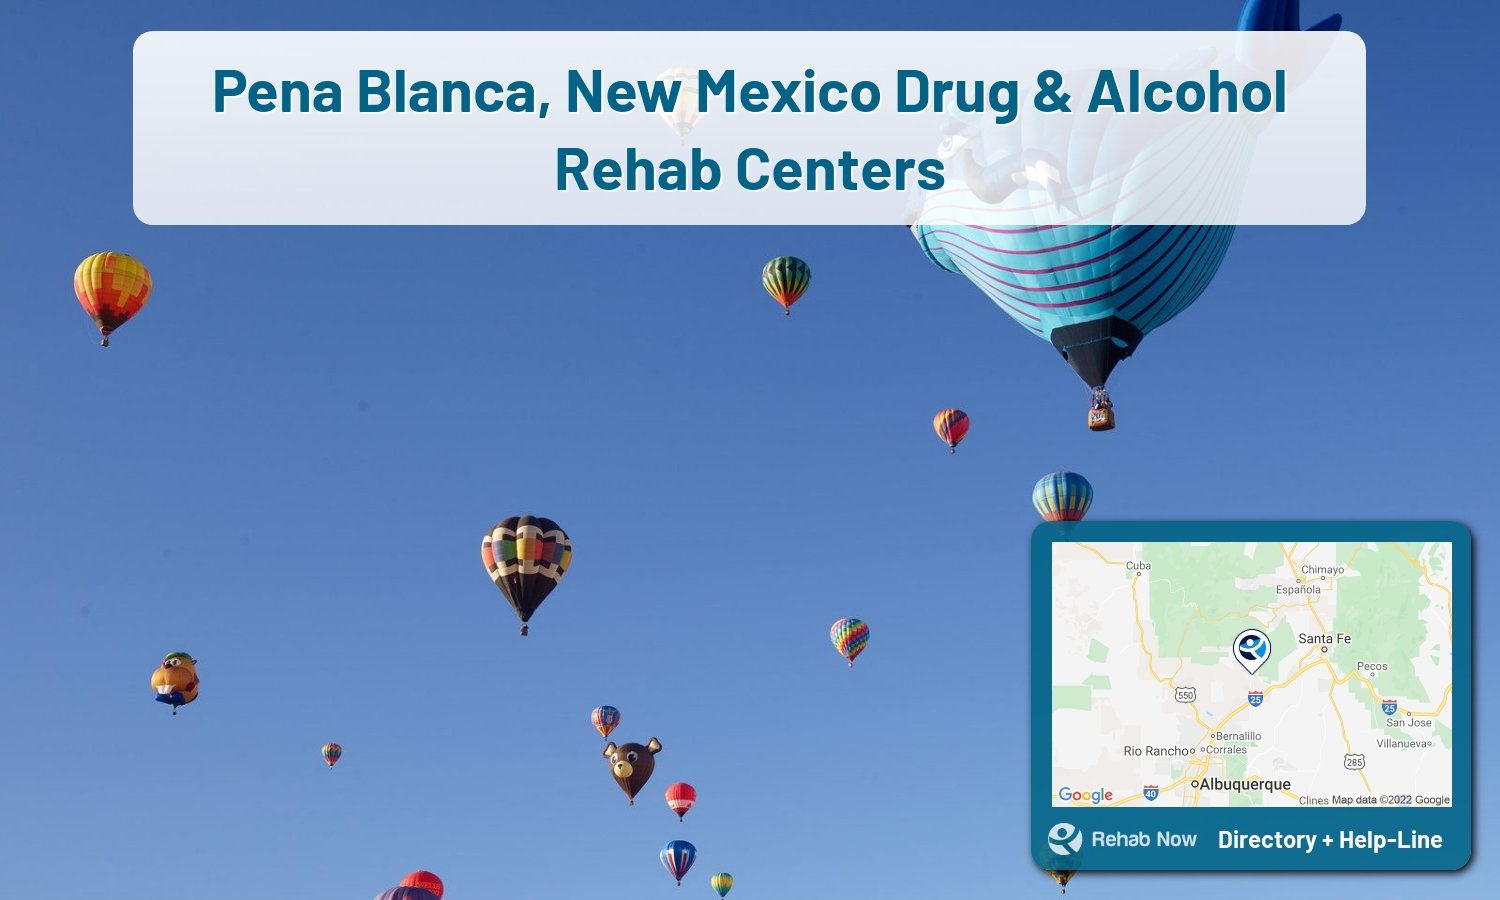 Drug rehab and alcohol treatment services near you in Pena Blanca, New Mexico. Need help choosing a center? Call us, free.